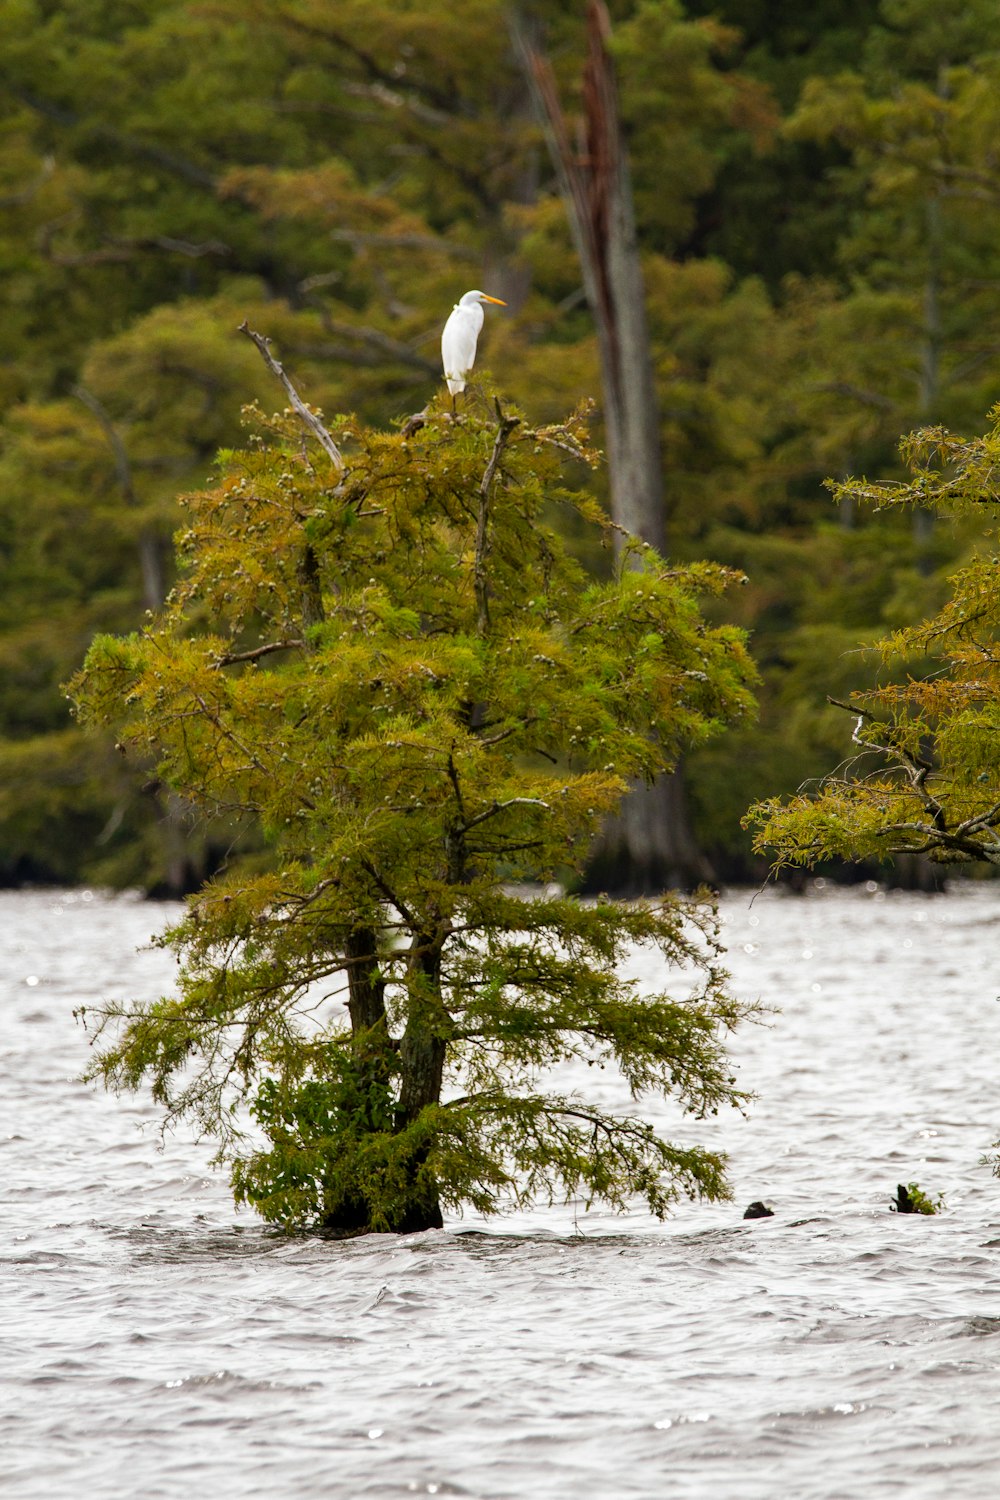 white bird flying over green trees near body of water during daytime